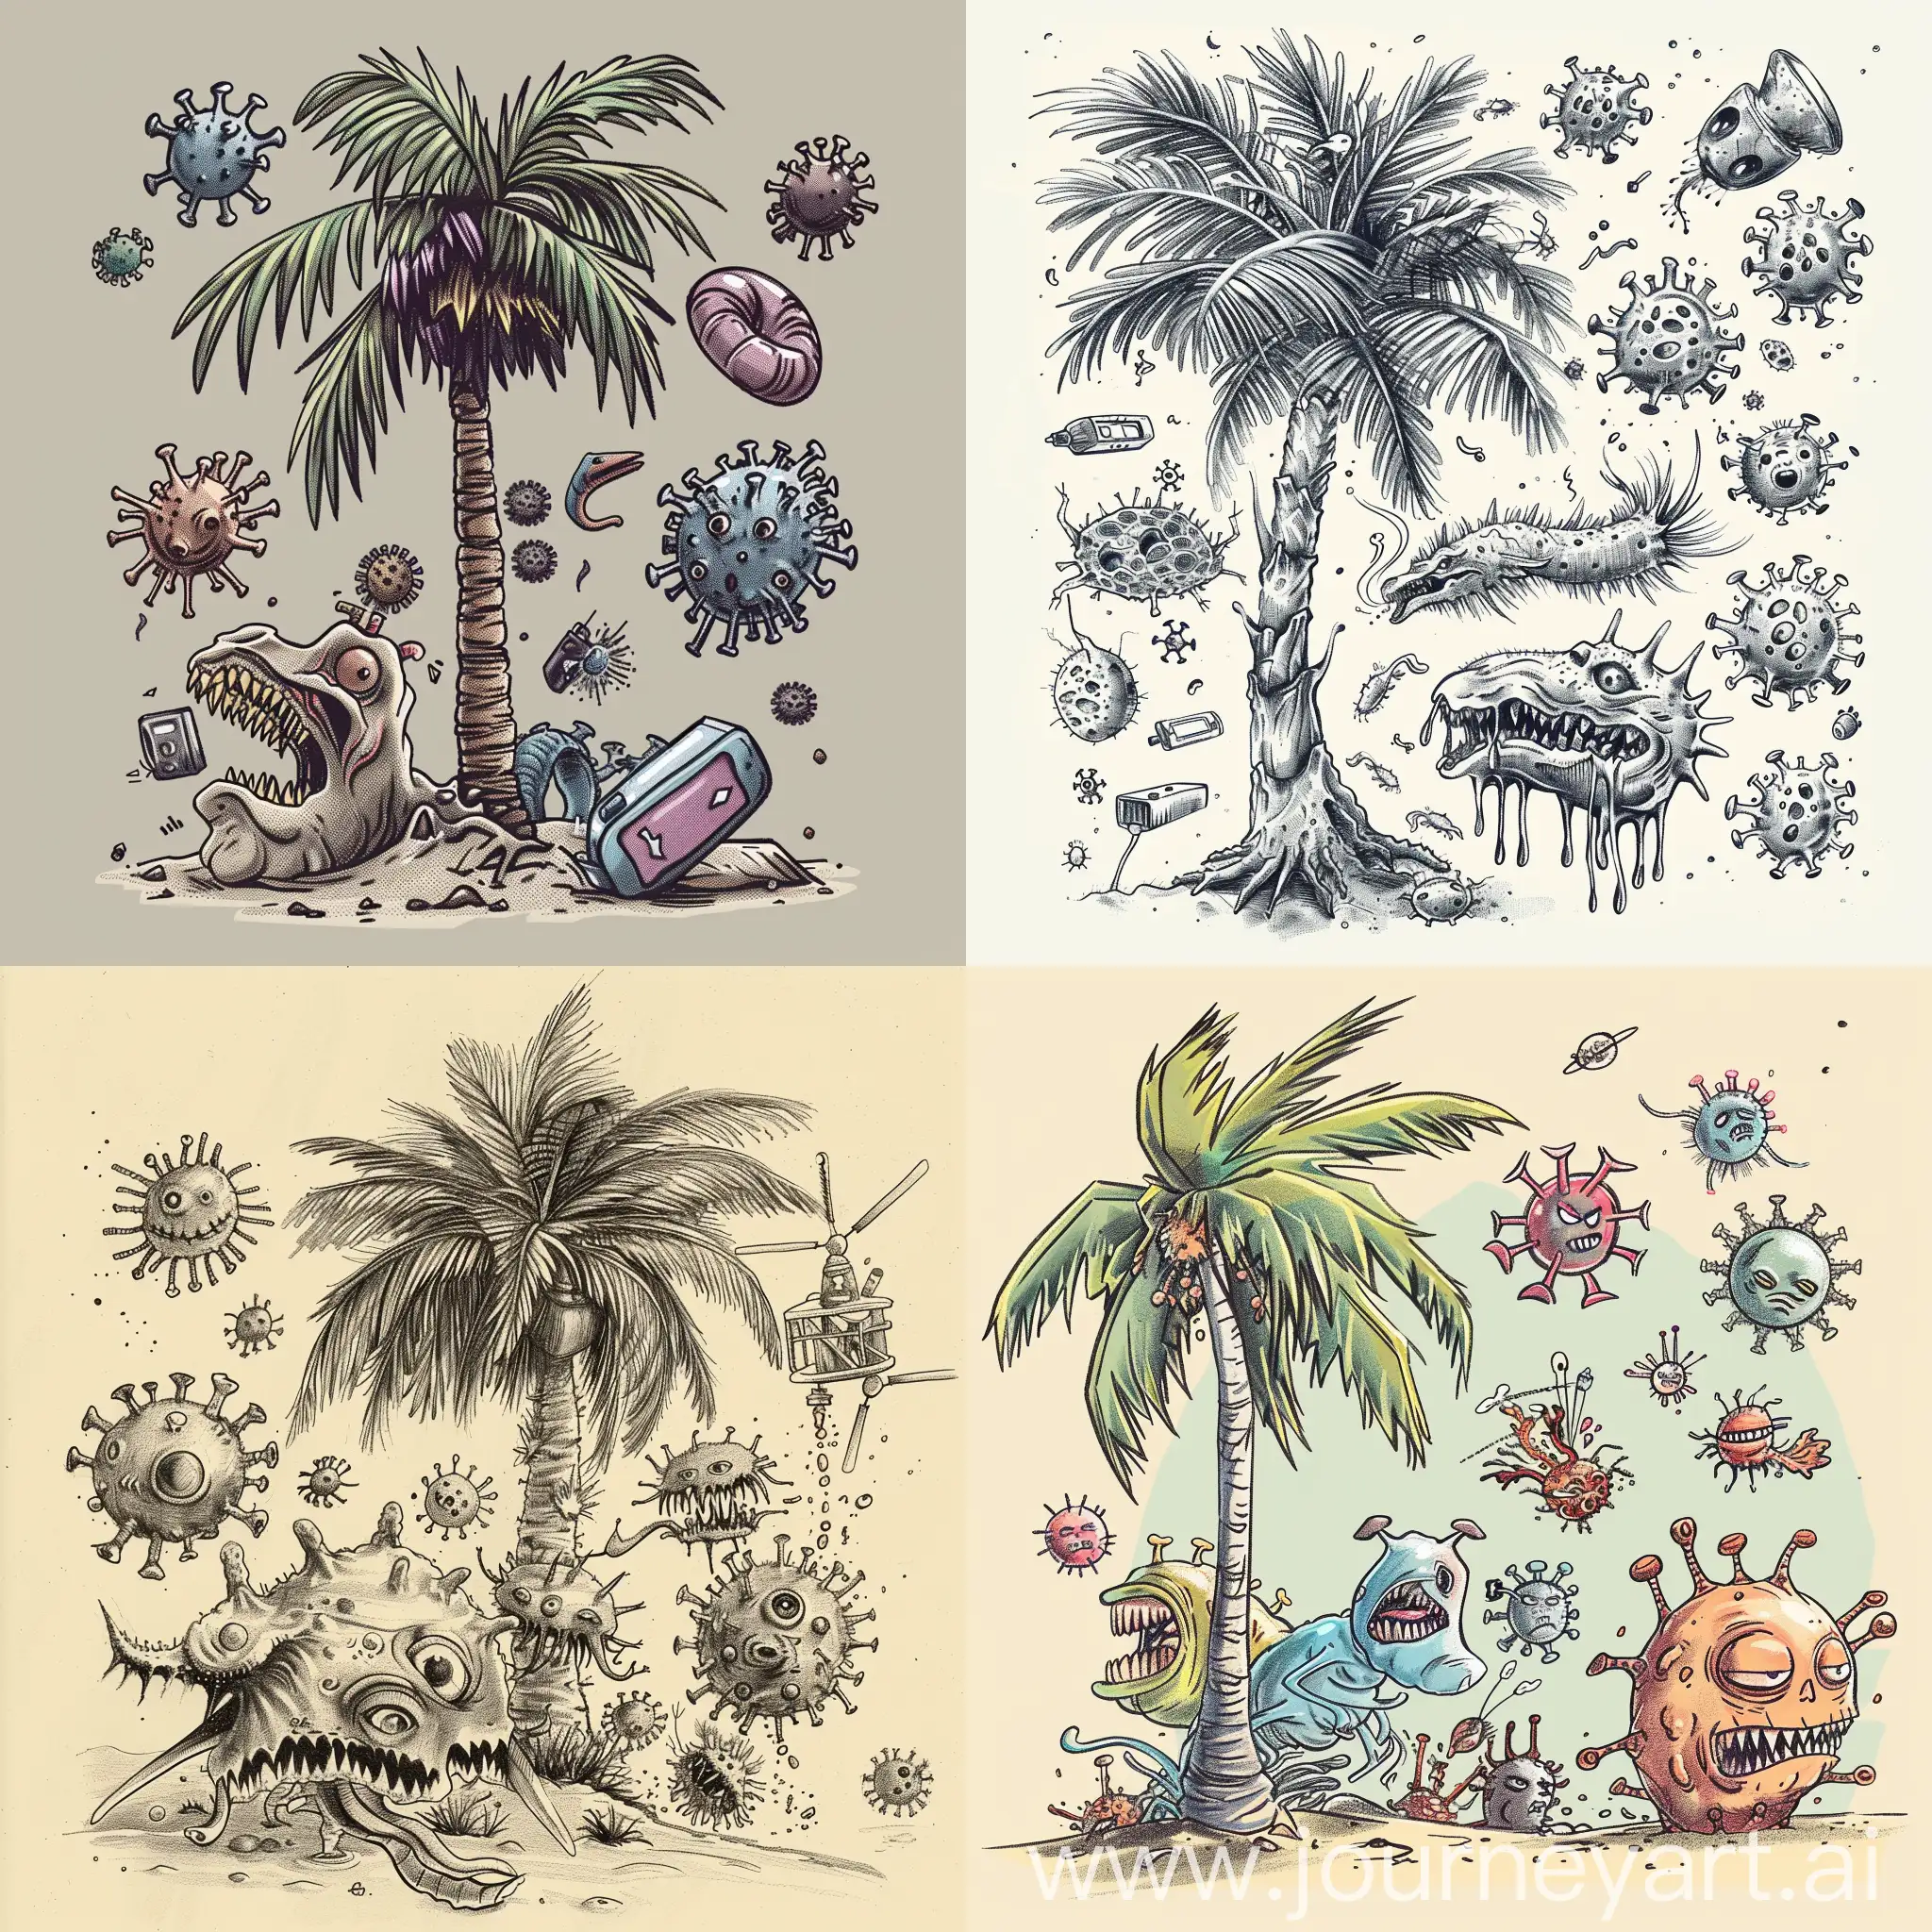 Whimsical-Fusion-of-Viruses-Animals-and-Devices-under-a-Tranquil-Palm-Tree